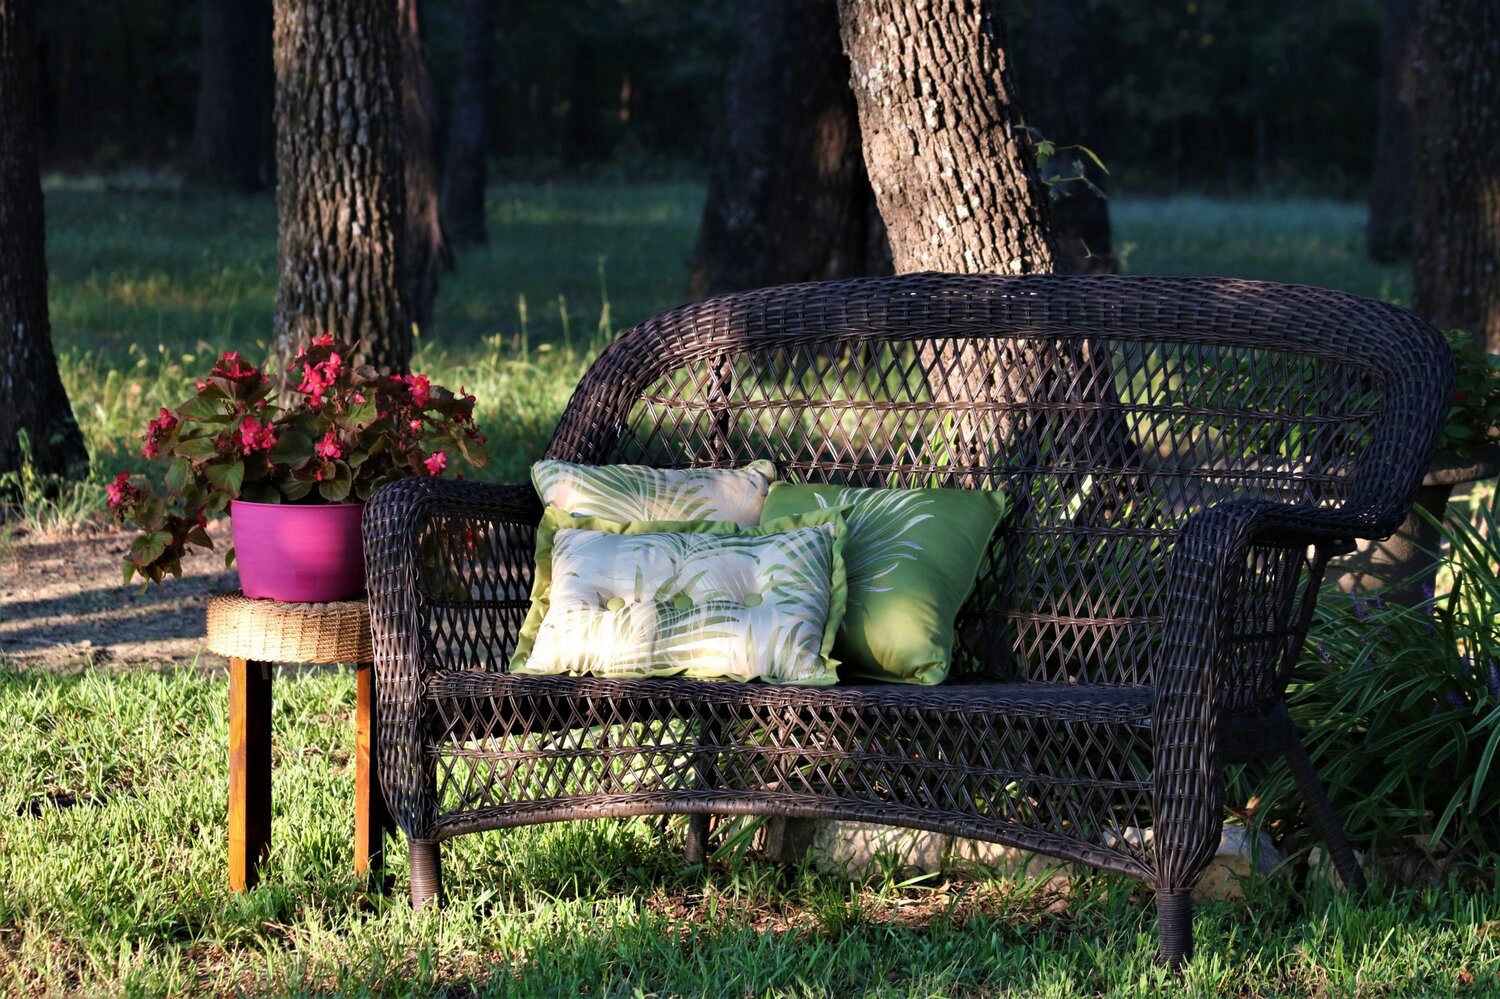 A seating area doesn’t have to be extensive; personalize with favorite pillows and flowers.